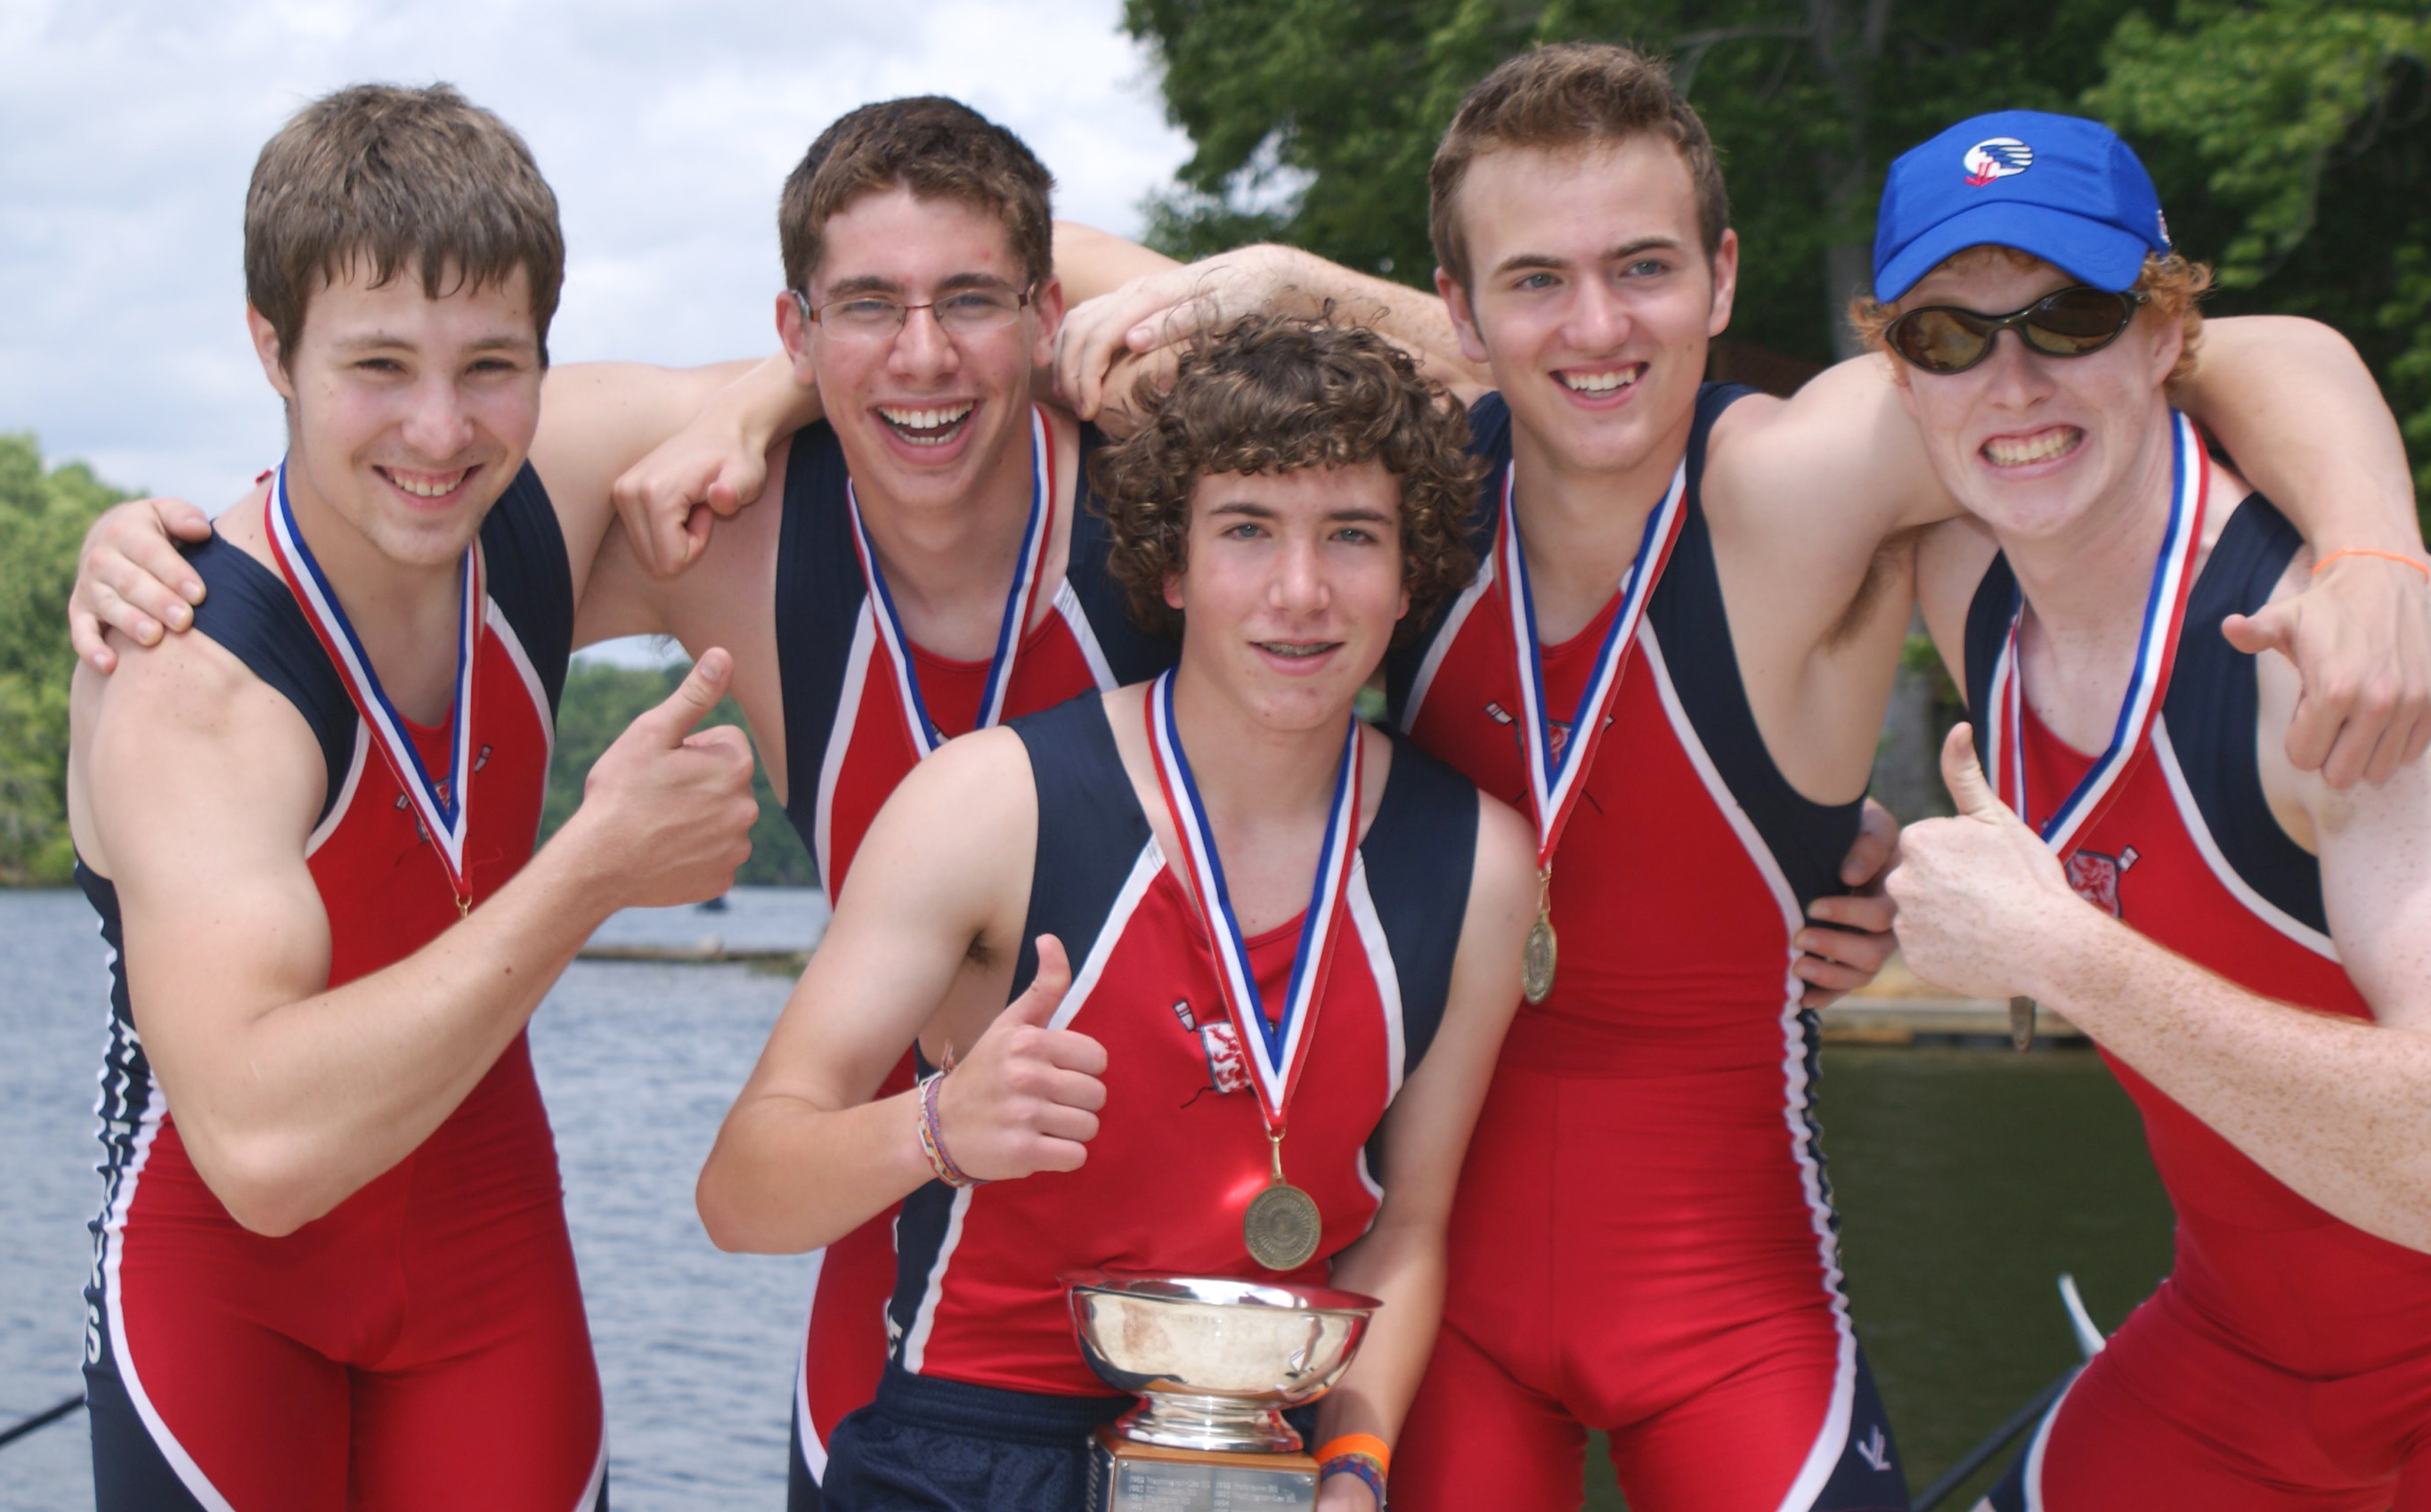 Titan rowers nab gold, silver at states